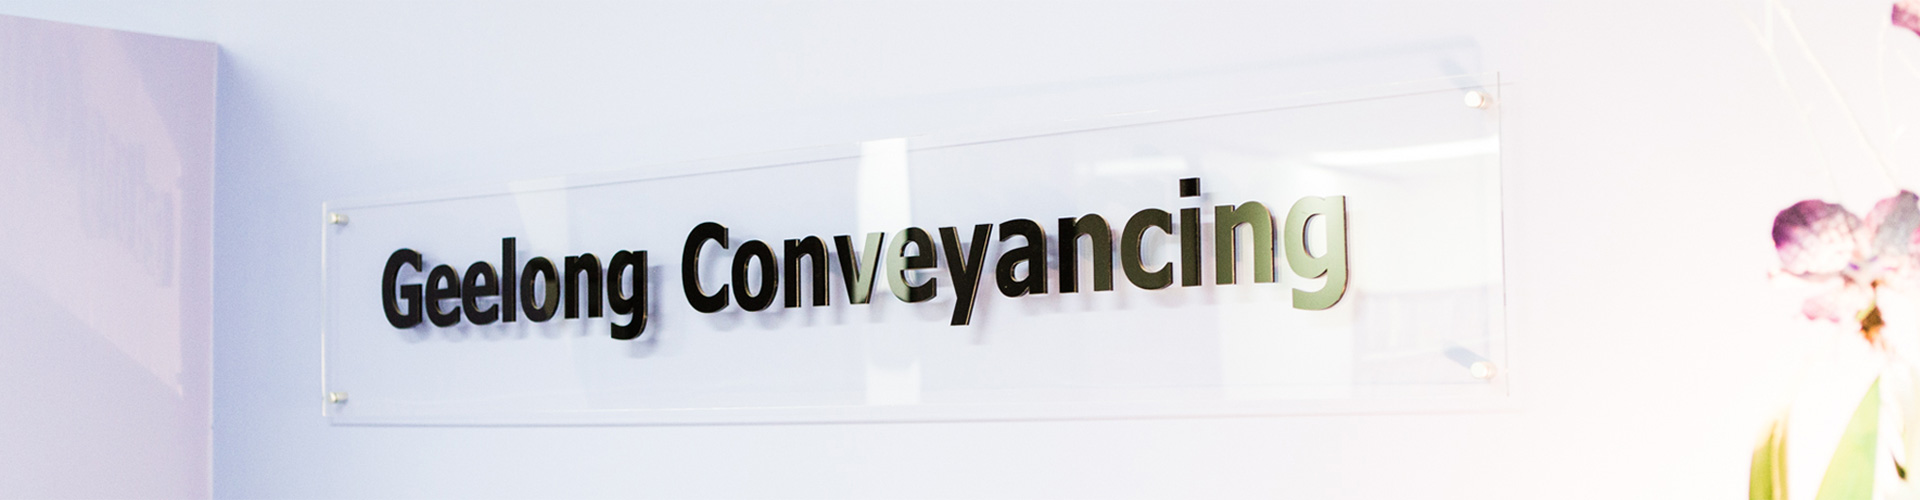 Geelong Conveyancing Office Front